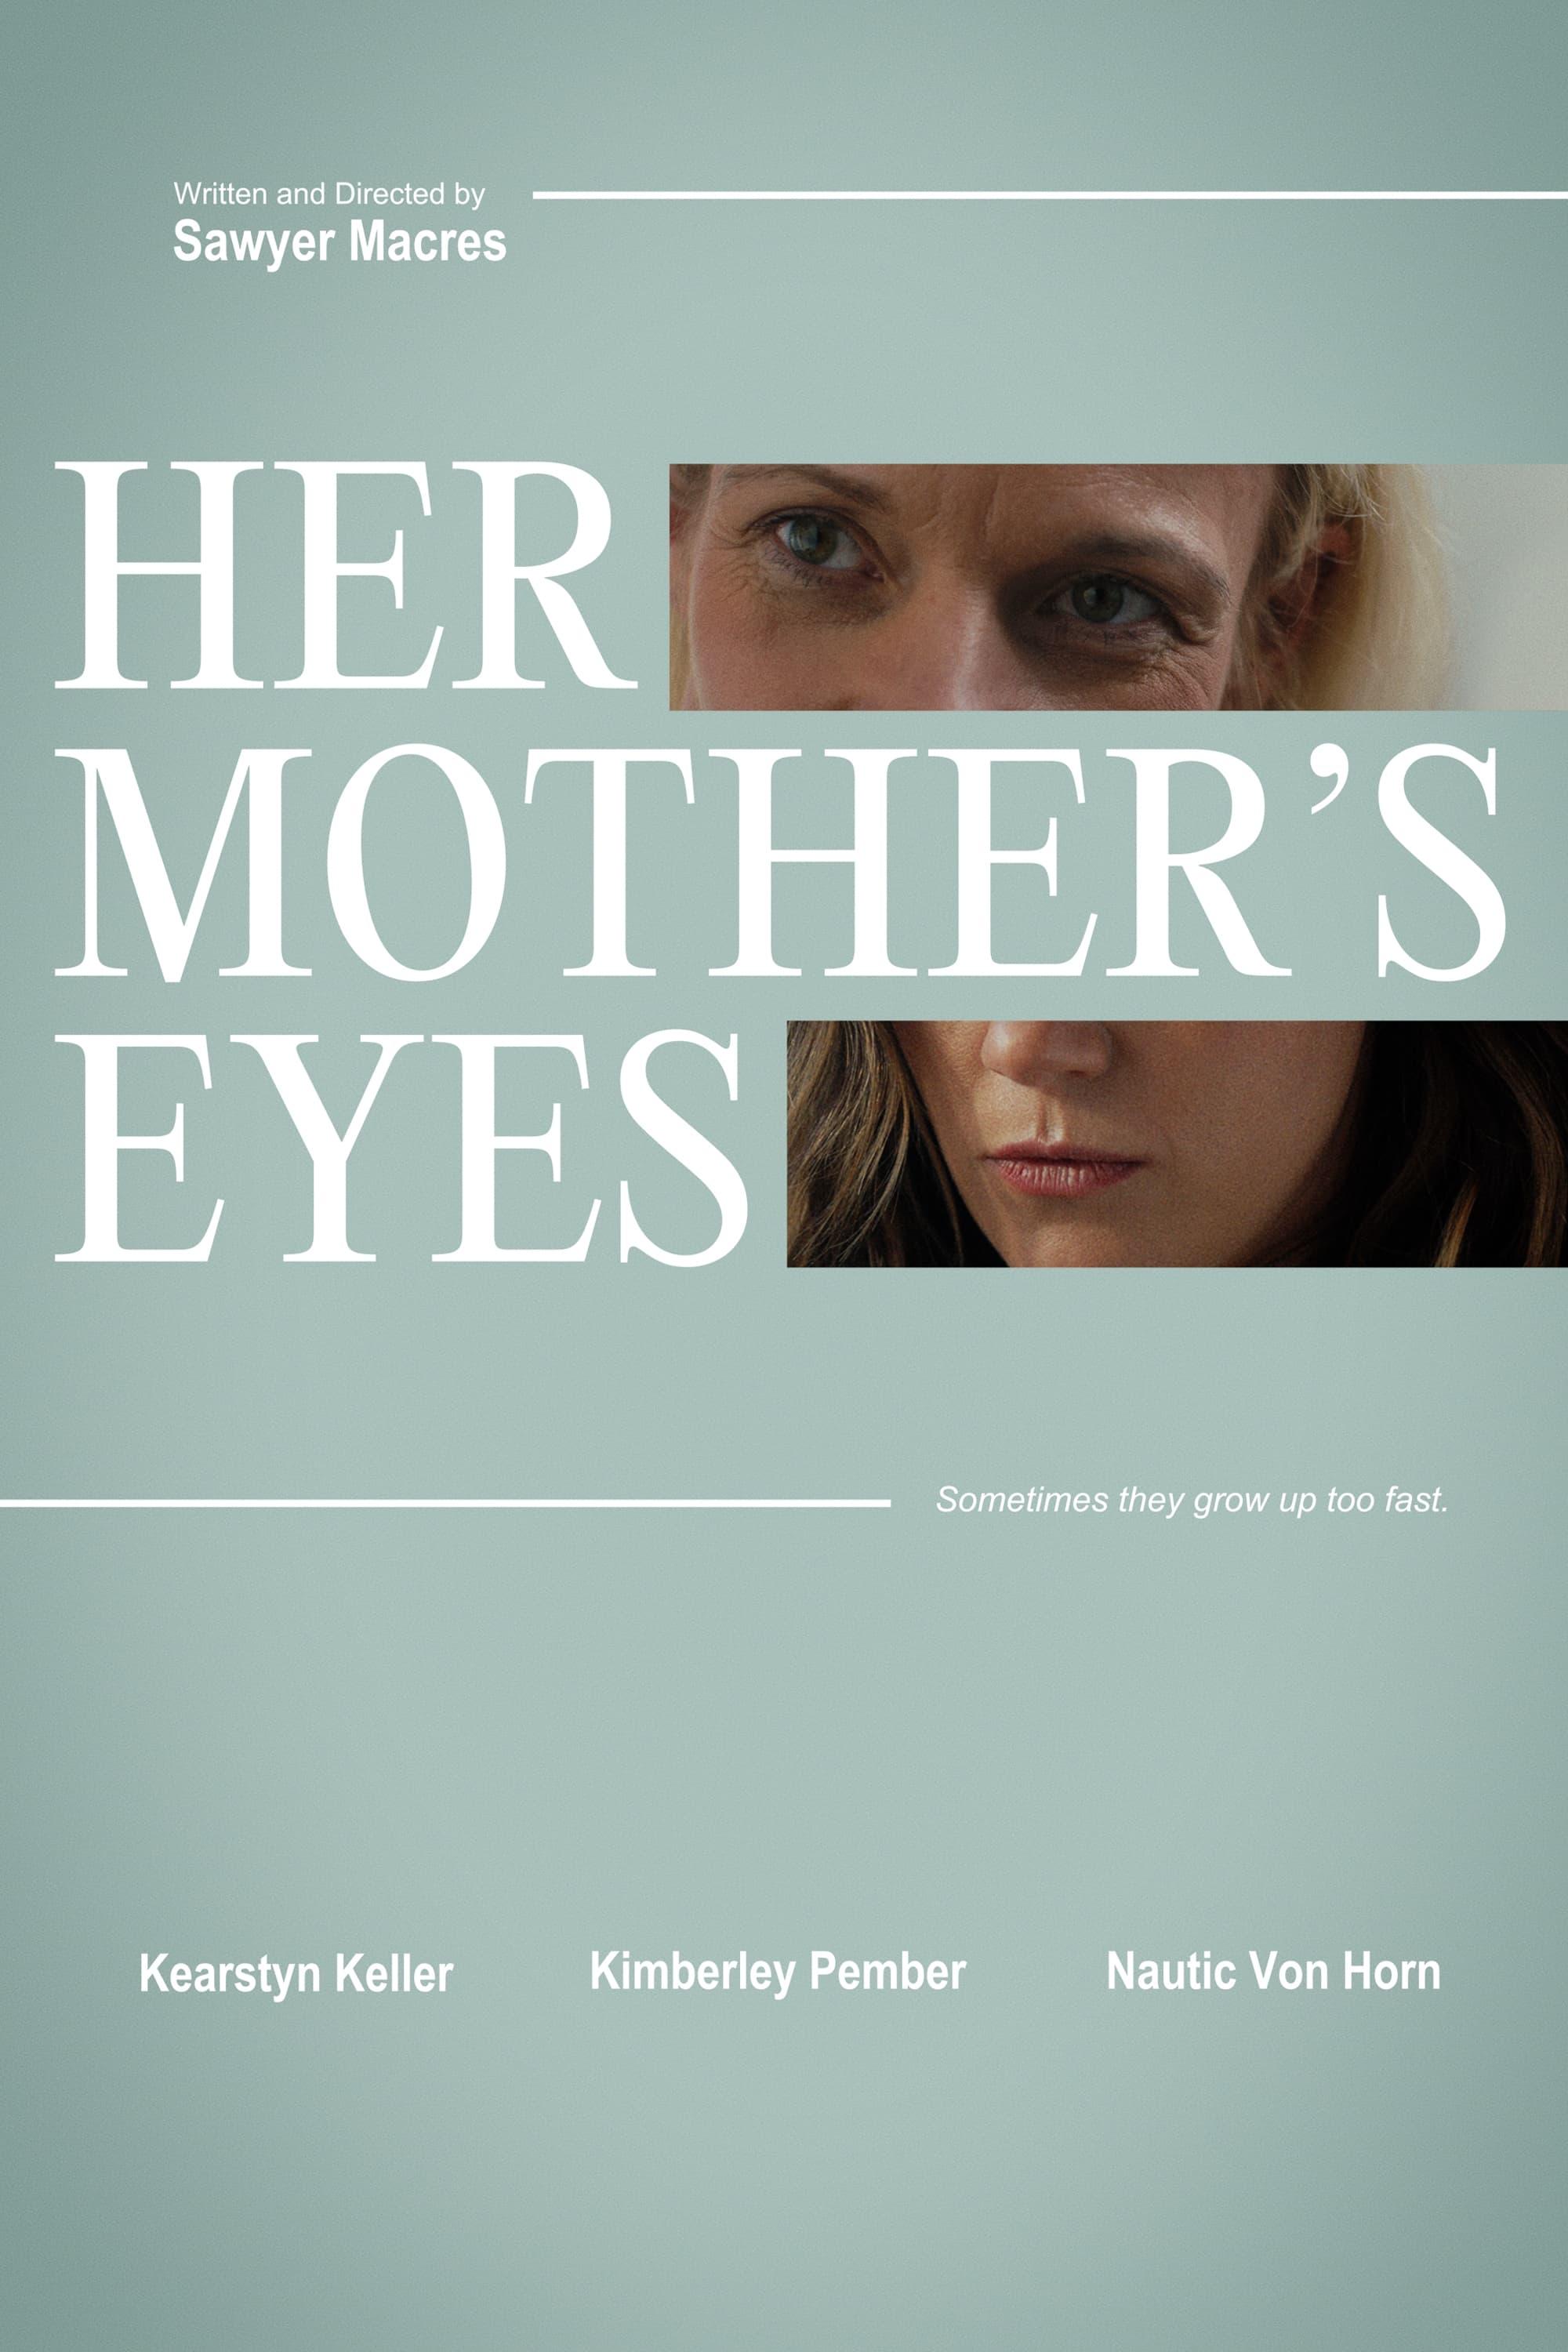 Her Mother's Eyes poster